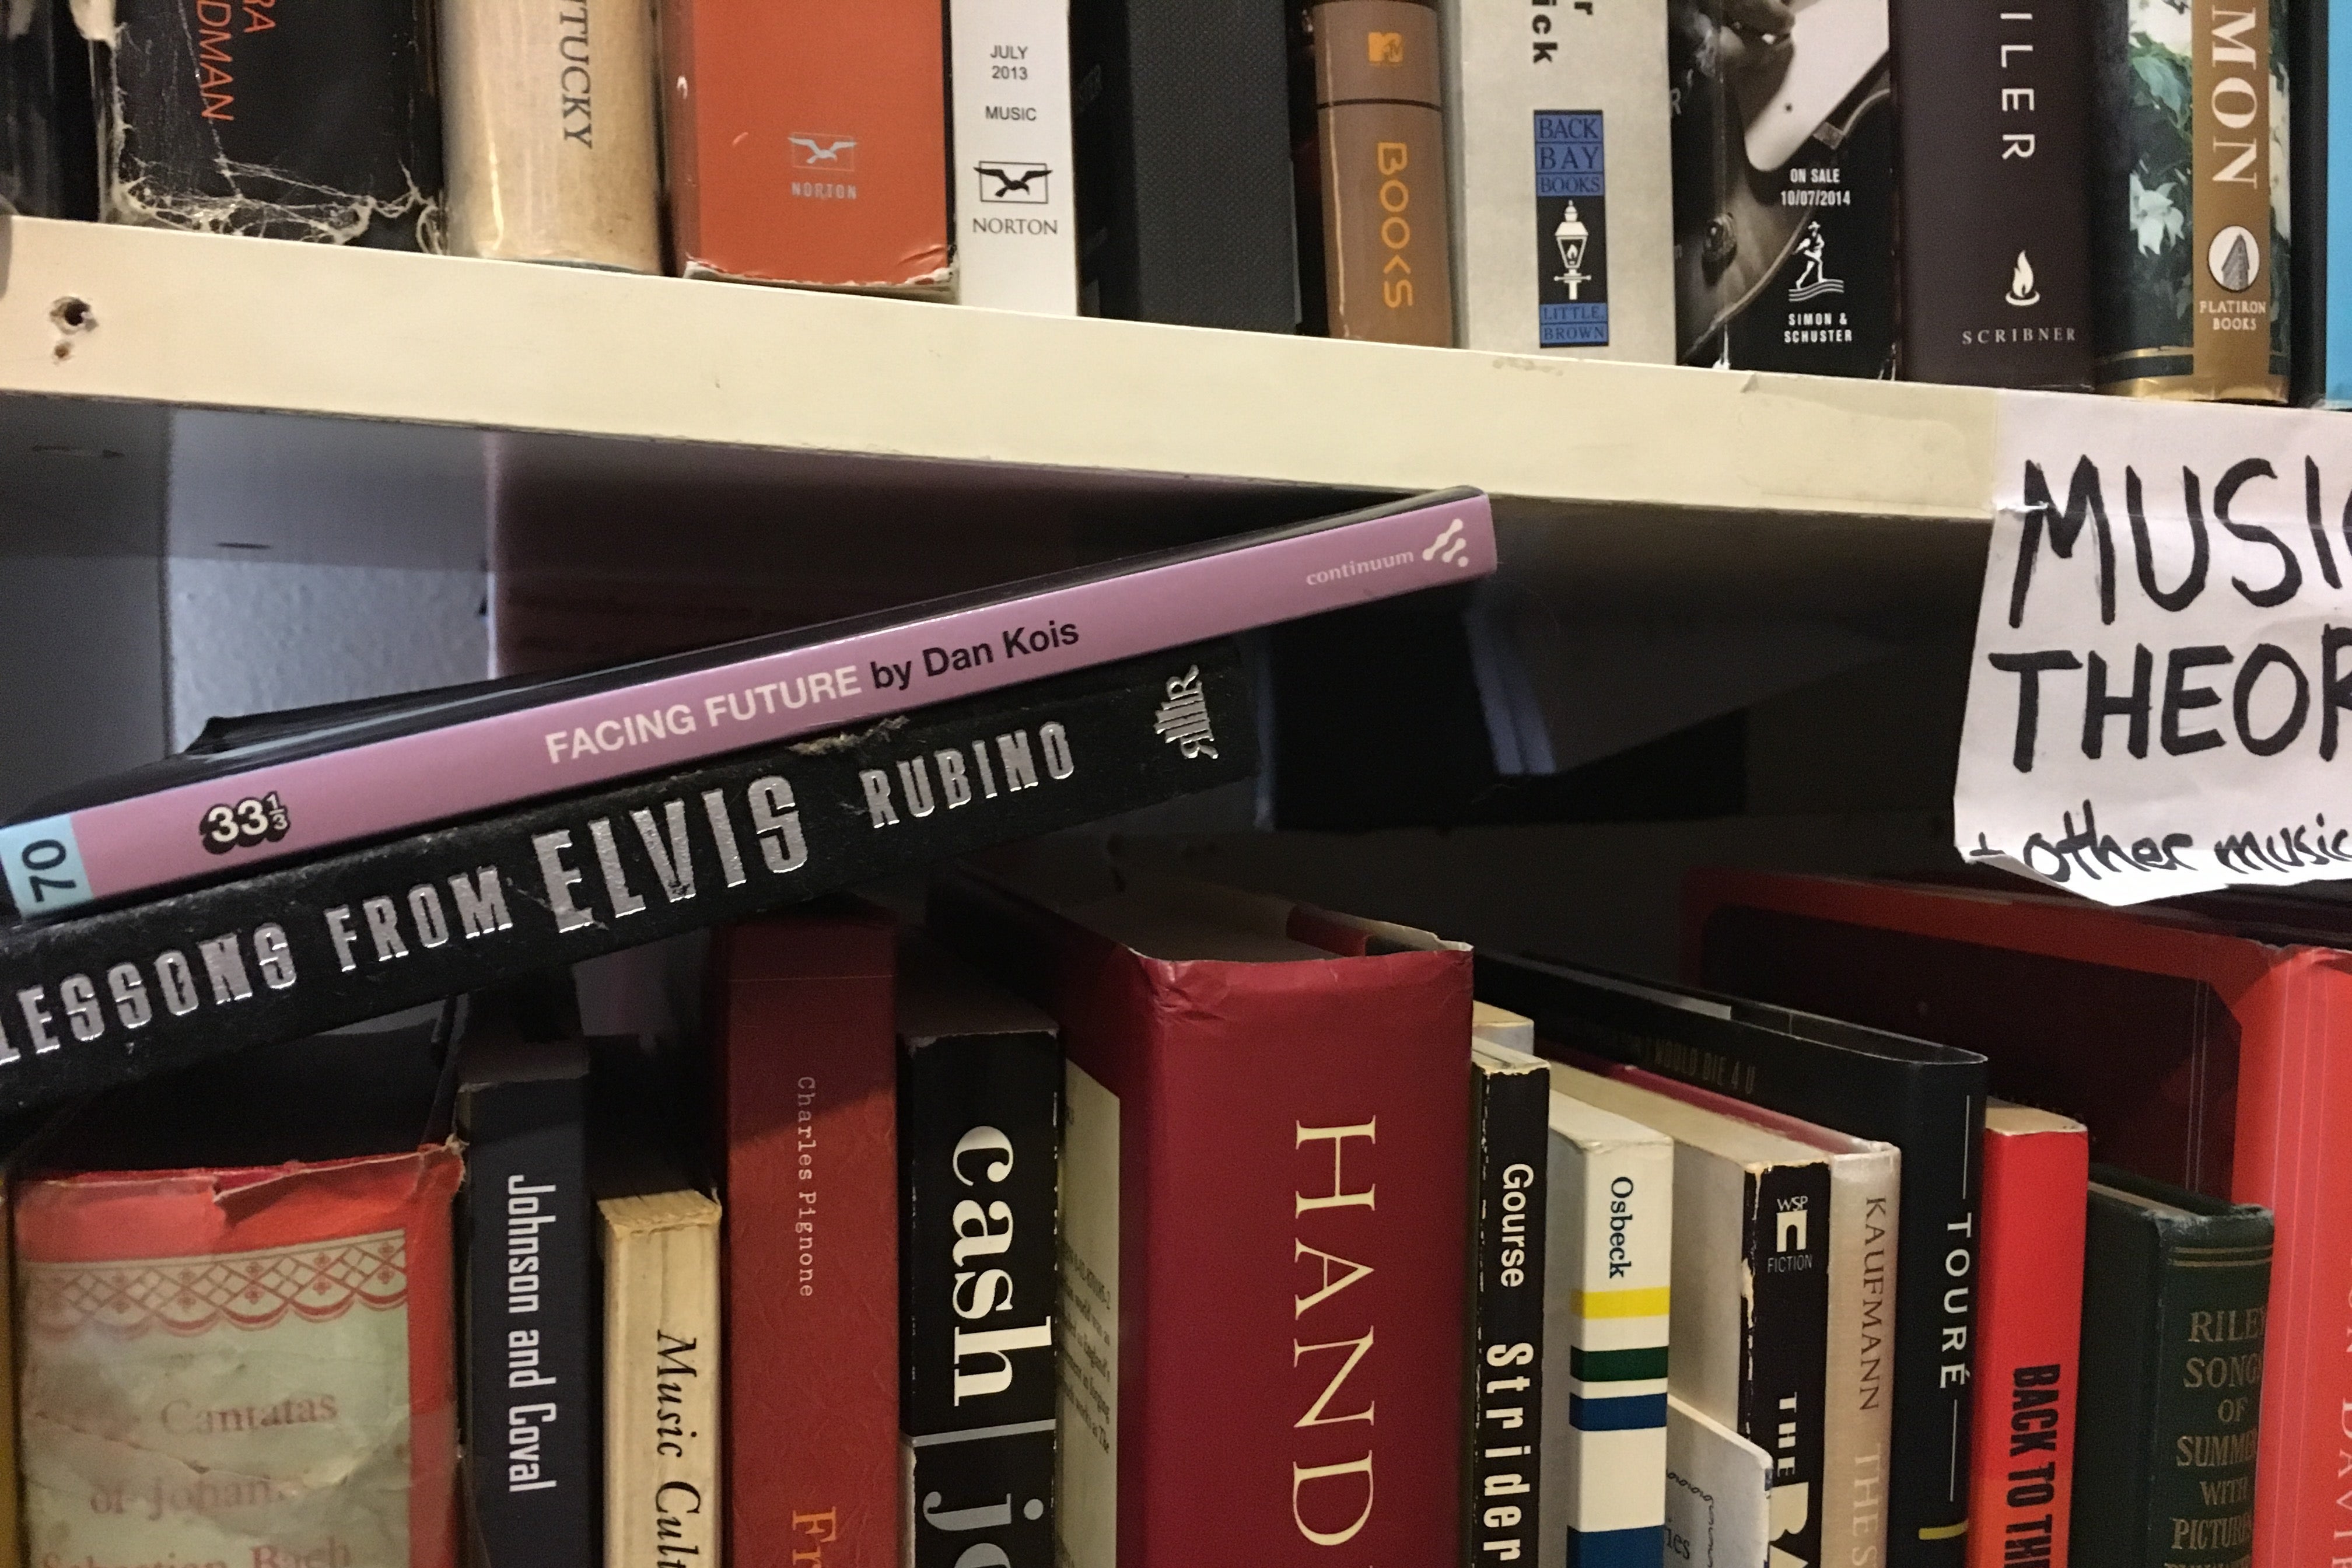 The author's book, Facing Future, sits slanted over a stack of books marked "Music Theory"